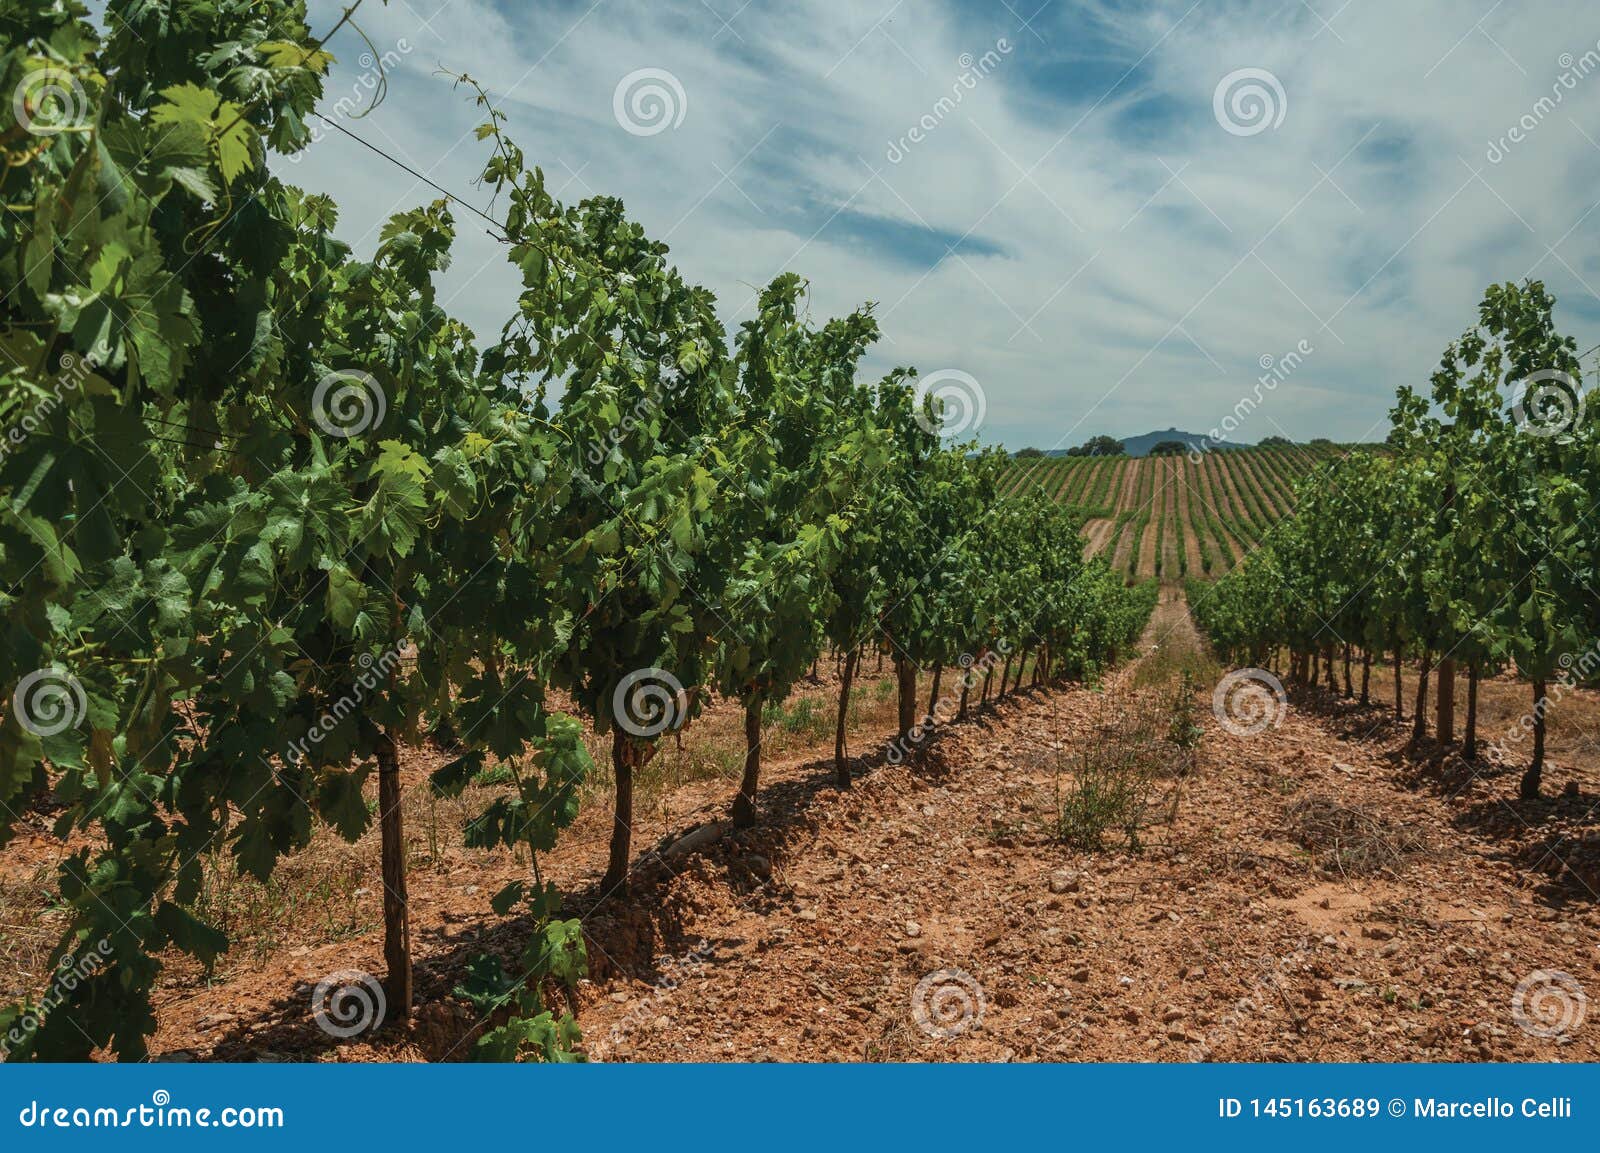 Parallel Vines Going Up The Hill In A Vineyard Near ...